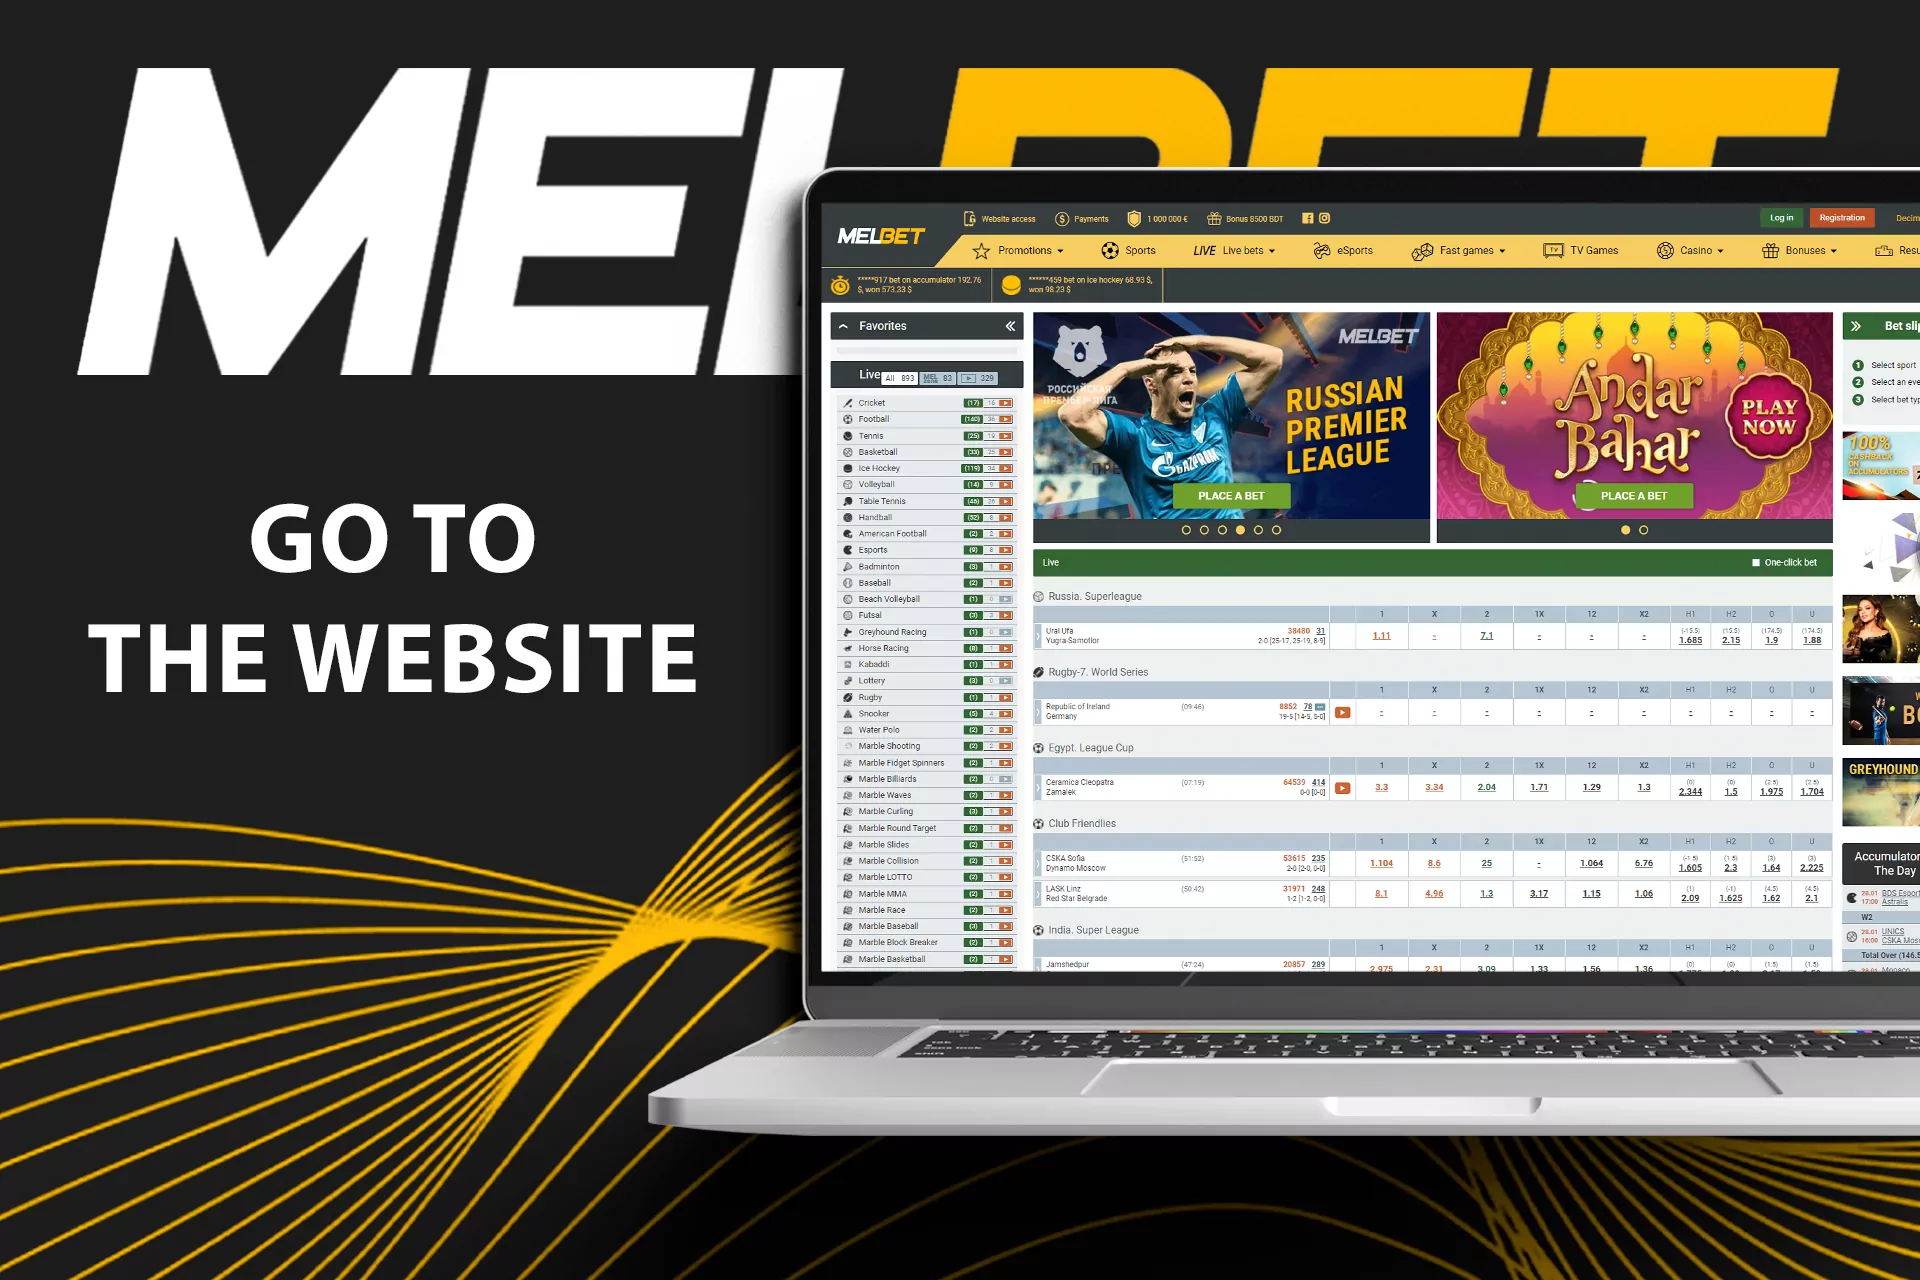 Go to the official website to start withdrawal from Melbet.